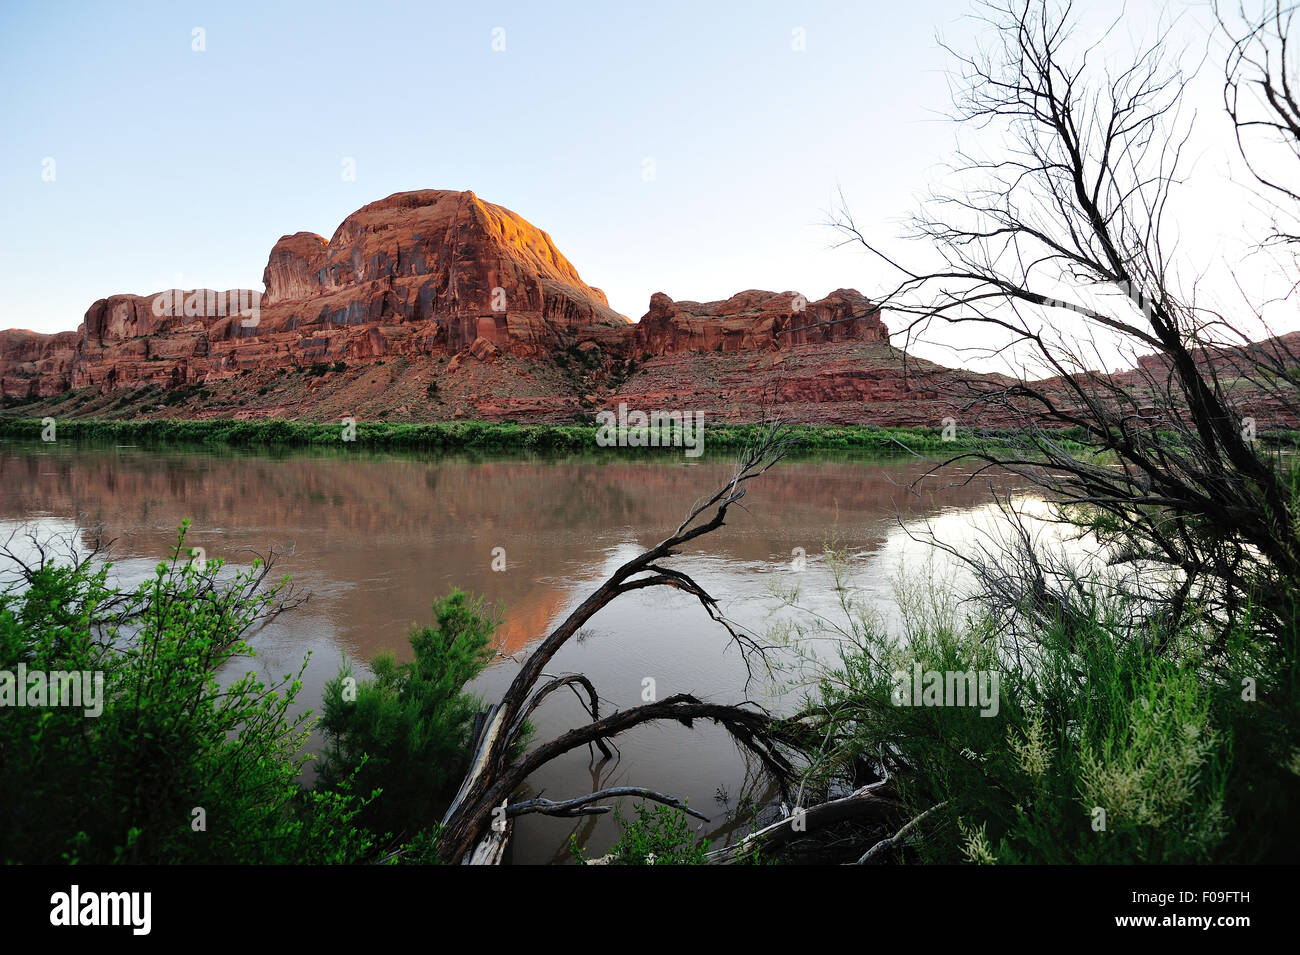 The Colorado River in Moab, Utah, United States.  A major supplier of water for the southwest US. Stock Photo